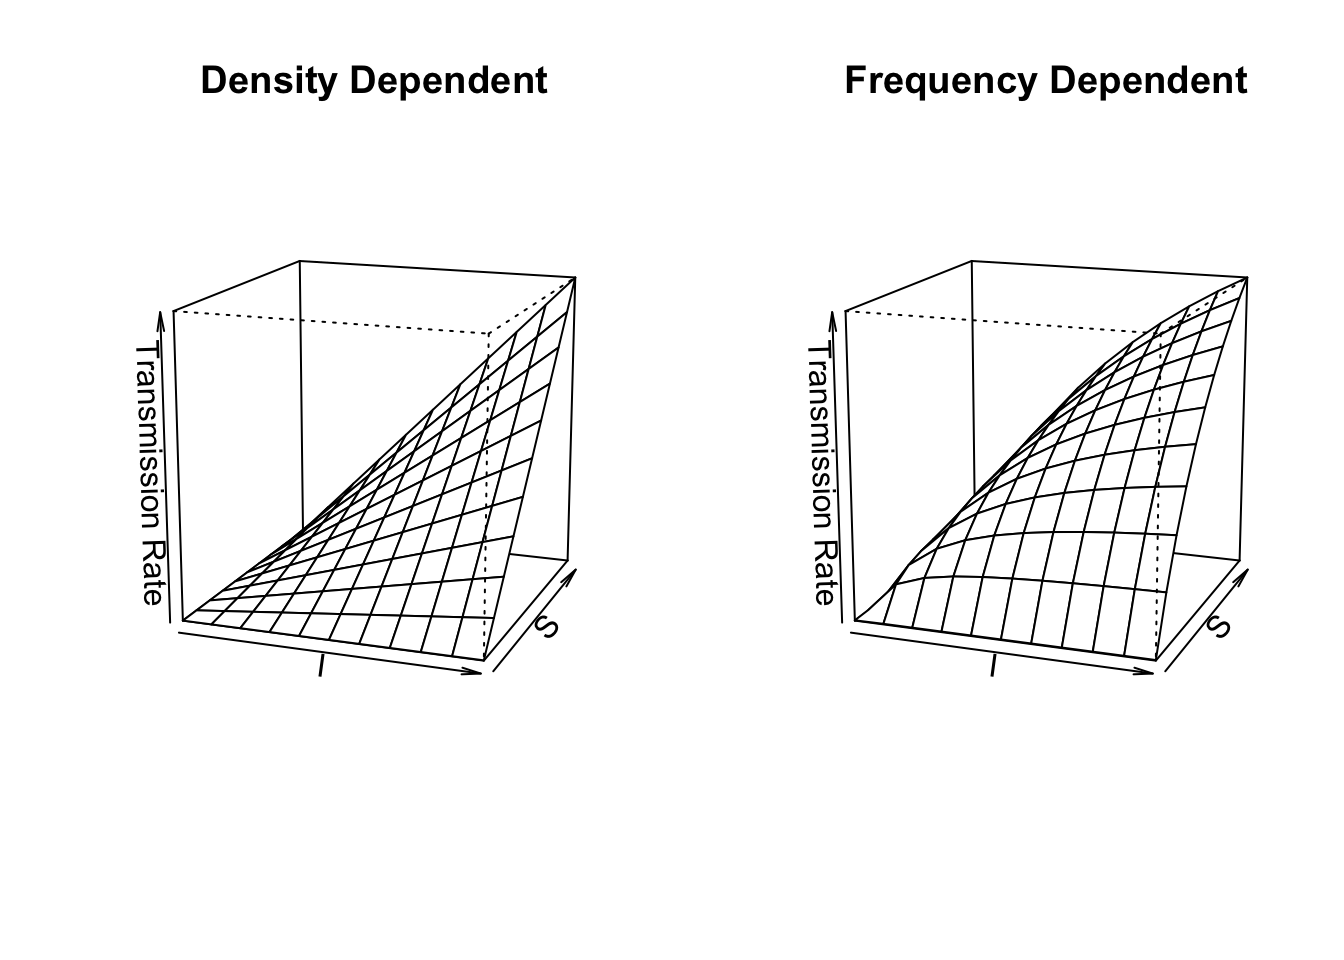 Disease transmission rates vary linearly vs. curvilinearly as functions of the Susceptible and Infected populations in density-dependent vs. frequency-dependent transmission models.